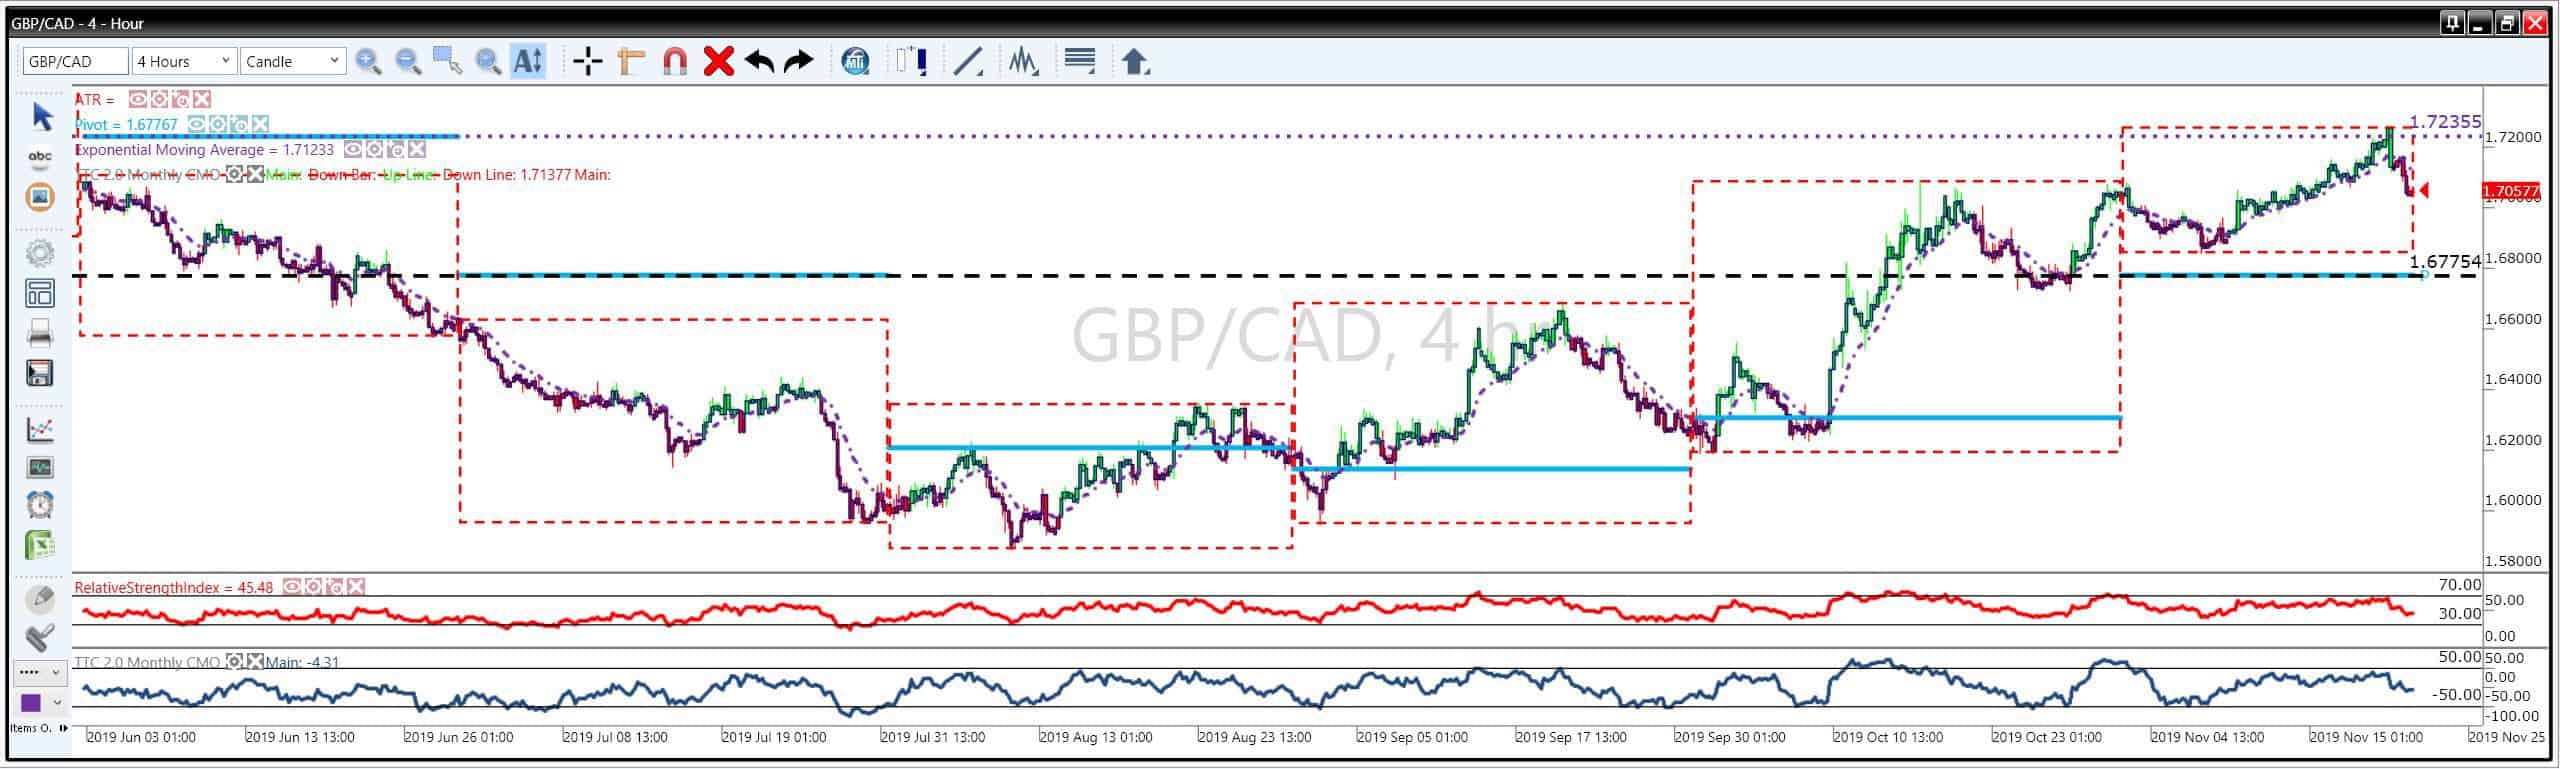 pivot points in trading shown on the GBP CAD charts